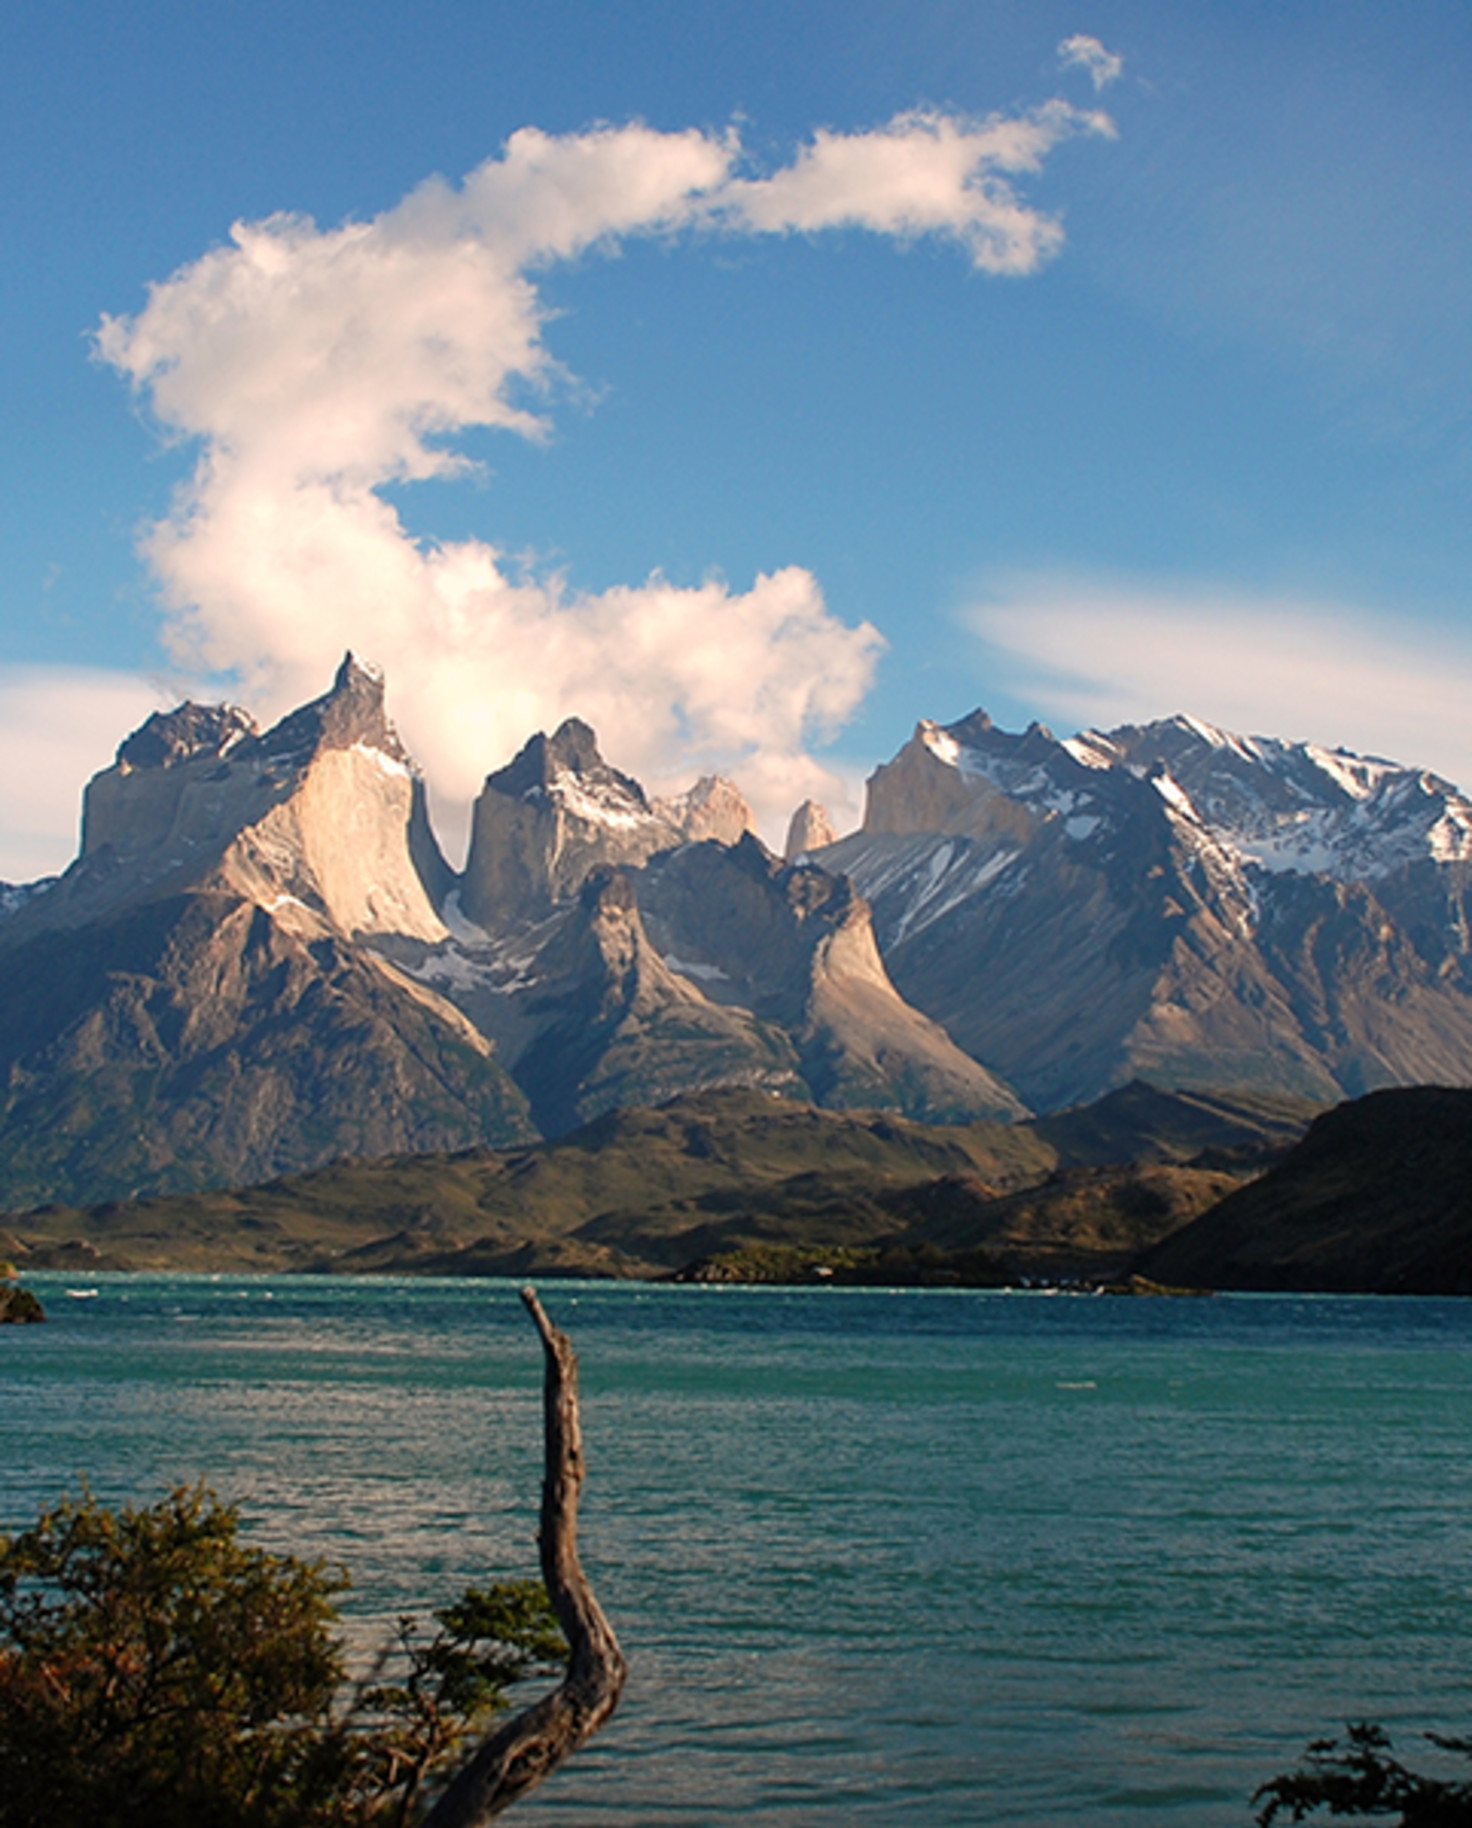 Mountains and lake in Patagonia